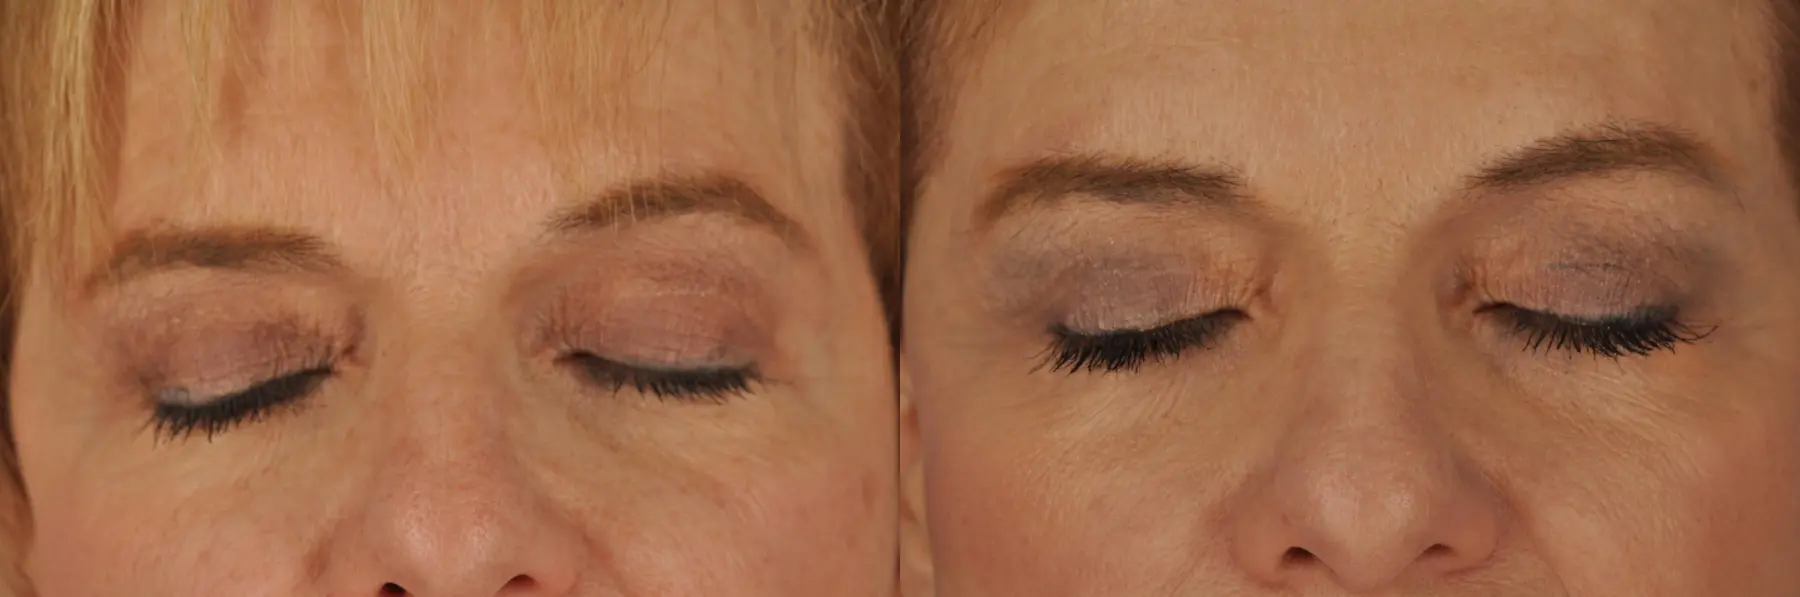 Chicago Eyelid Lift 8744 - Before and After 2